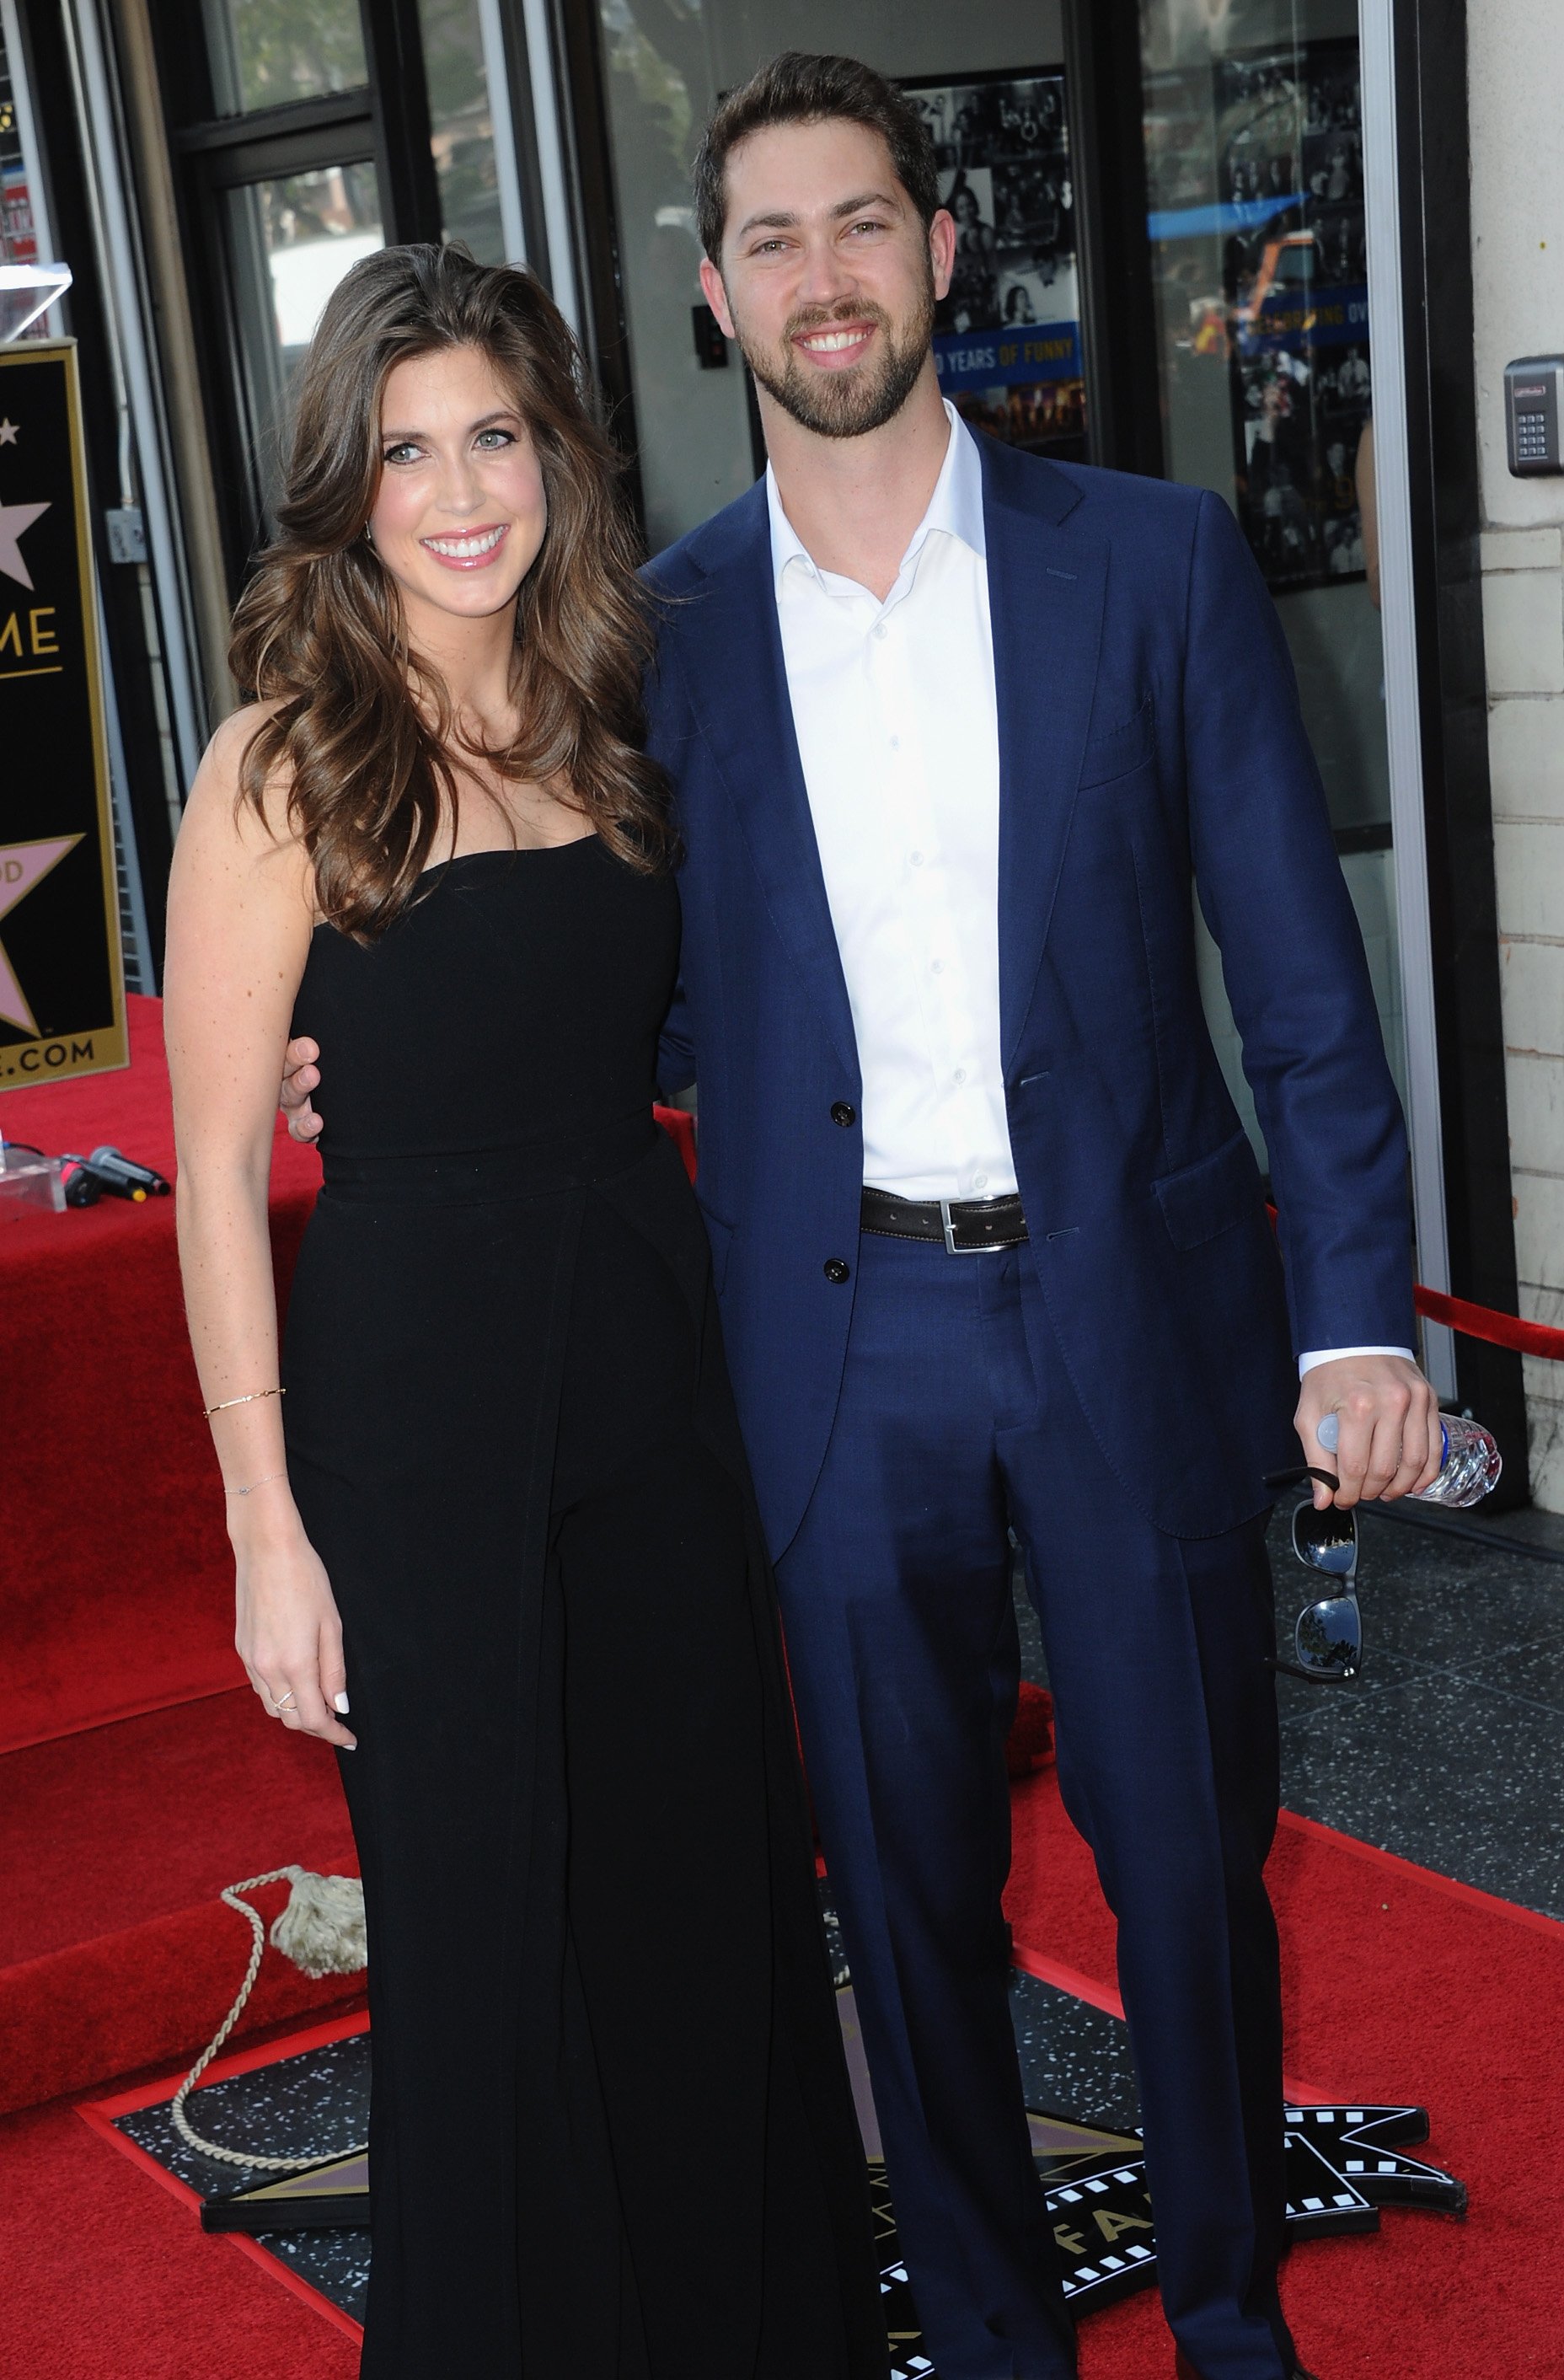 Jessica Altman and James Altman attend a ceremony honoring mother Lynda Carter with the 2,632nd star on the Hollywood Walk of Fame on April 3, 2018 in Hollywood, California. | Source: Getty Images